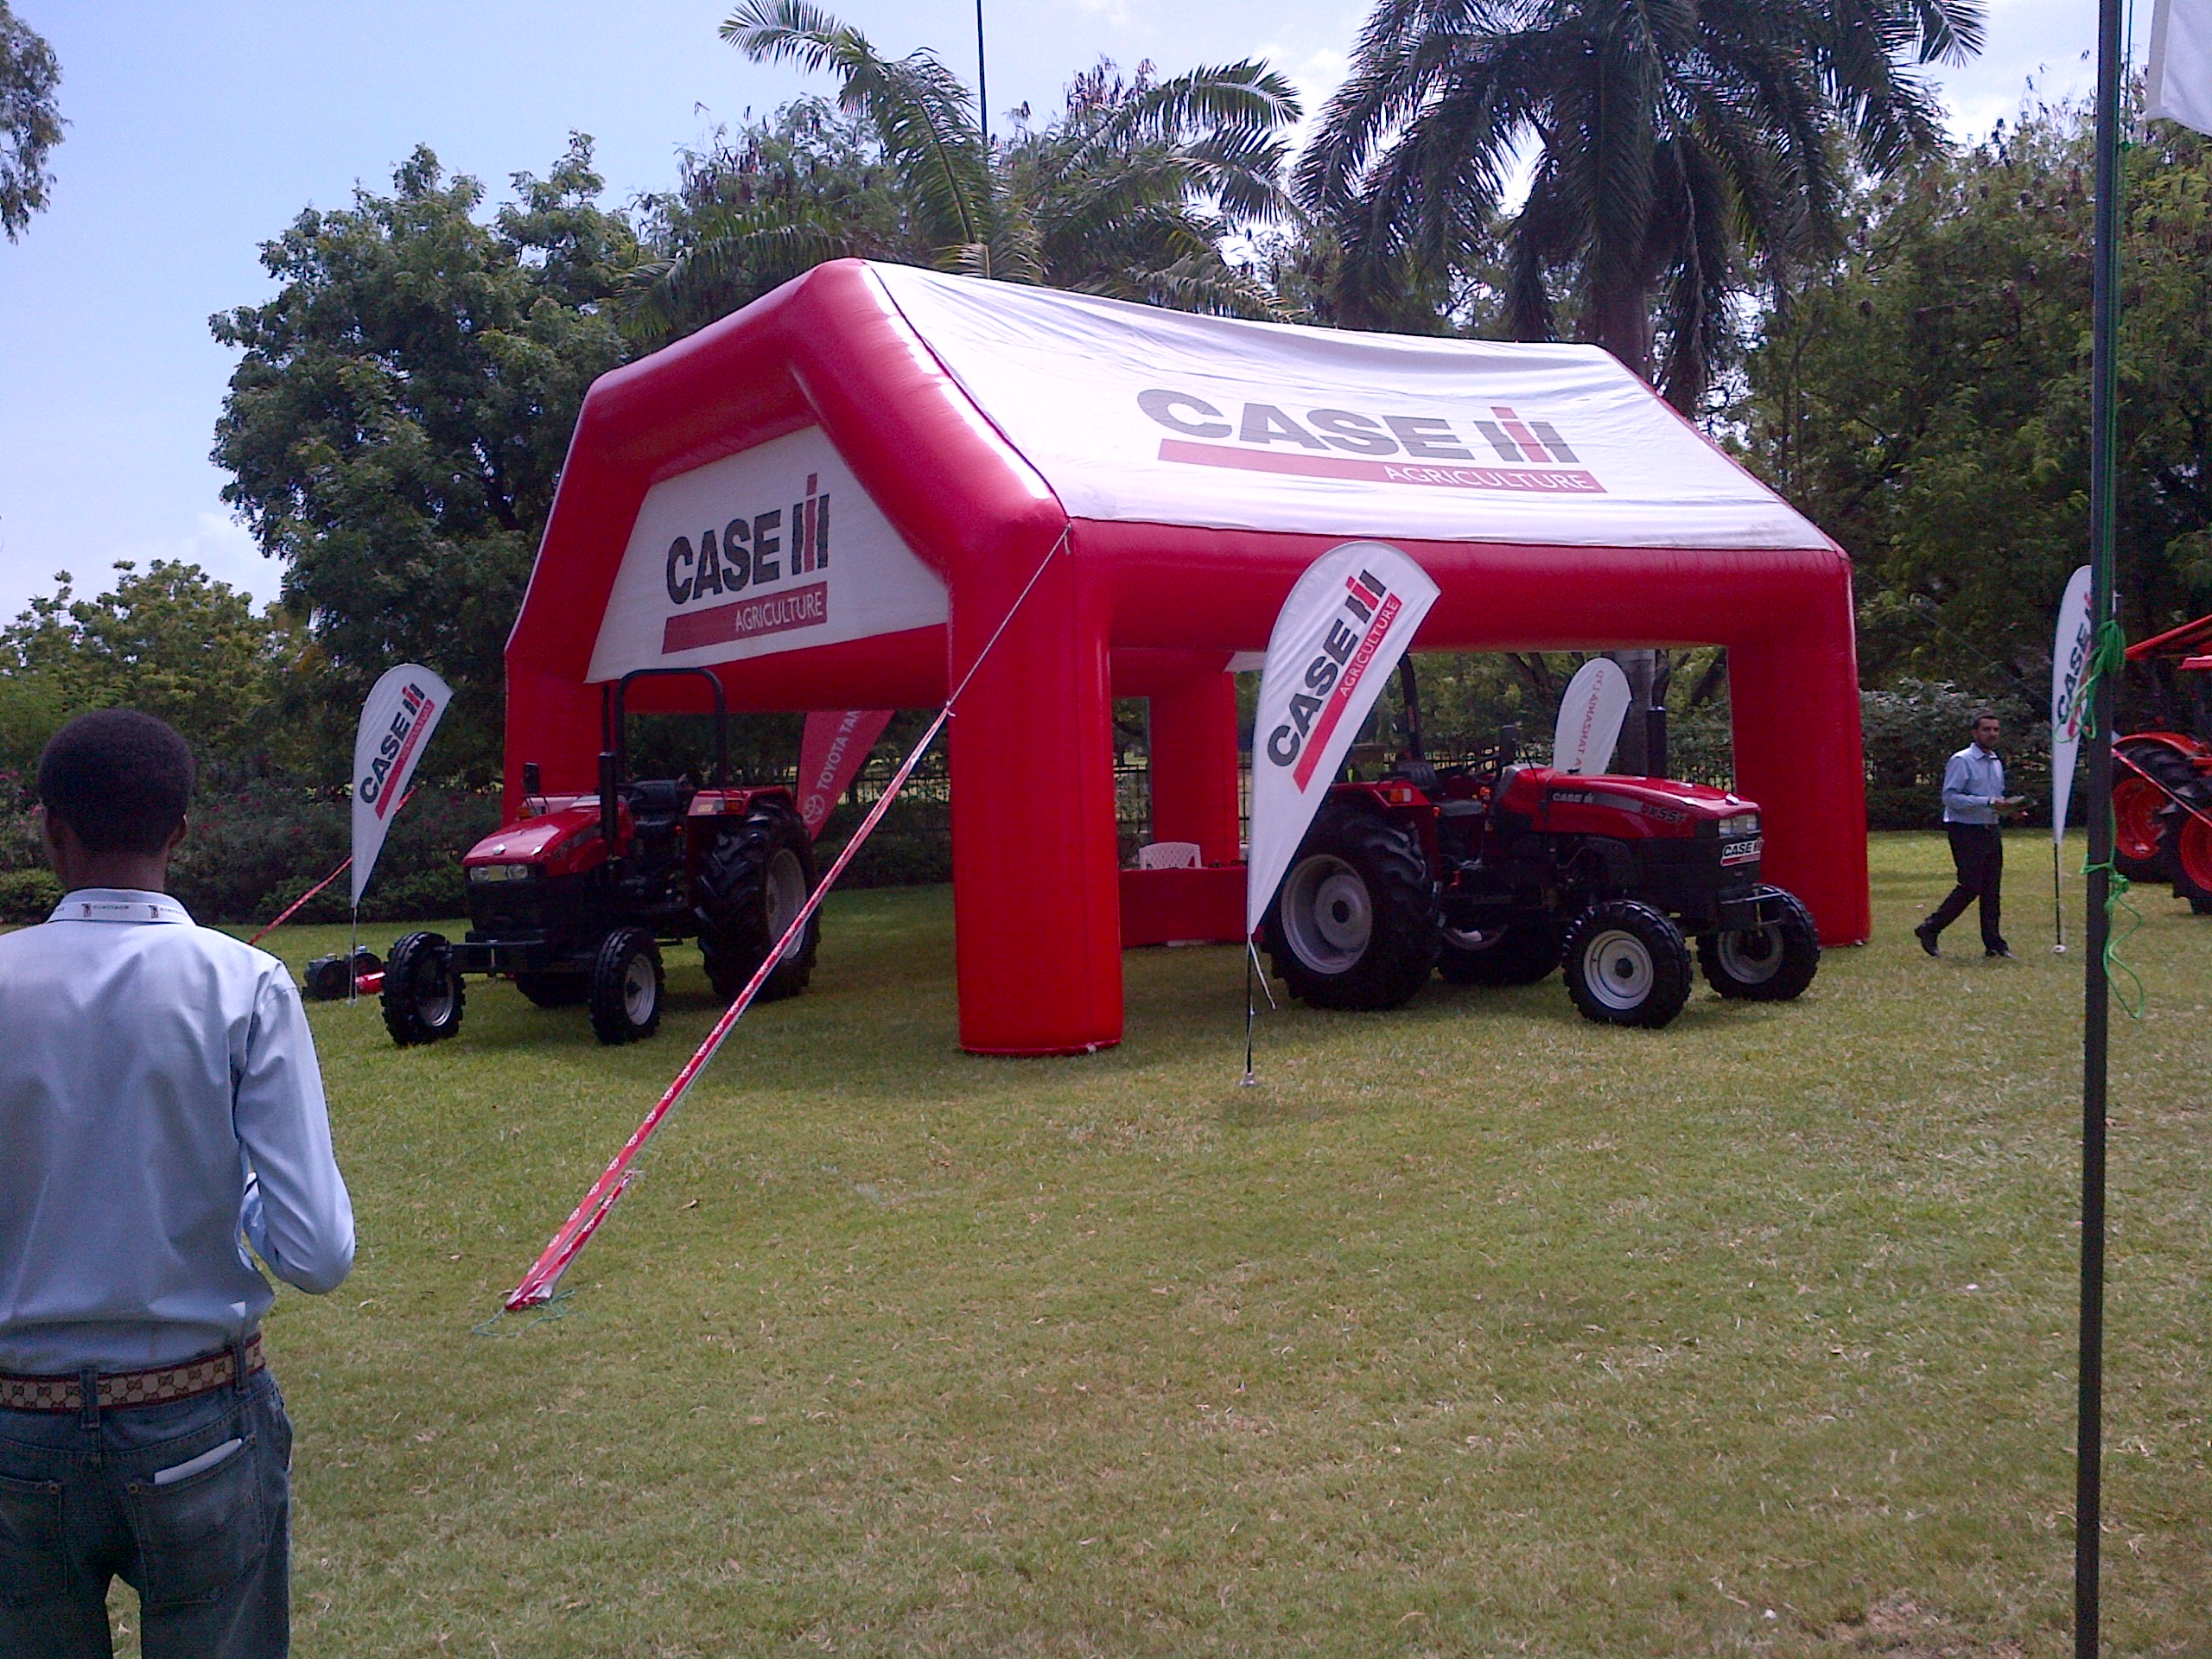 CASE IH SPONSORS THE AGRIBUSINESS CONGRESS EAST AFRICA IN TANZANIA TO SUPPORT THE REGIONS AGRICULTURAL GROWTH